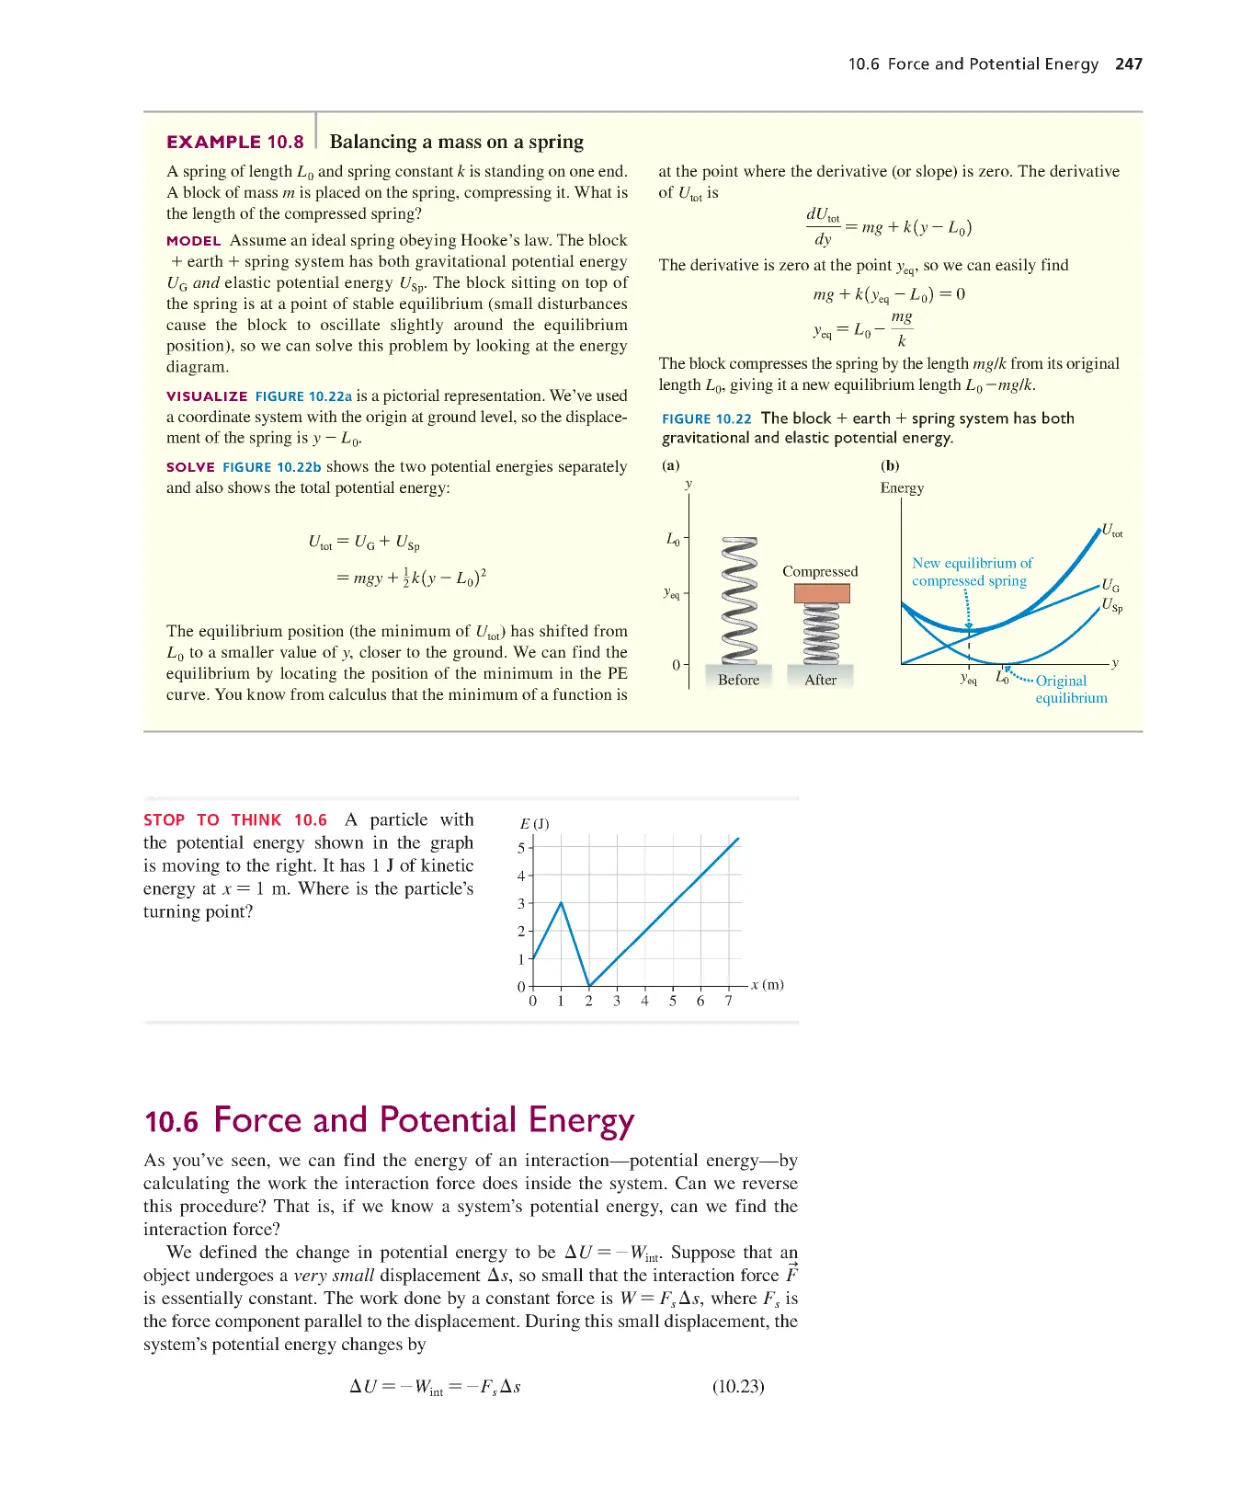 10.6. Force and Potential Energy